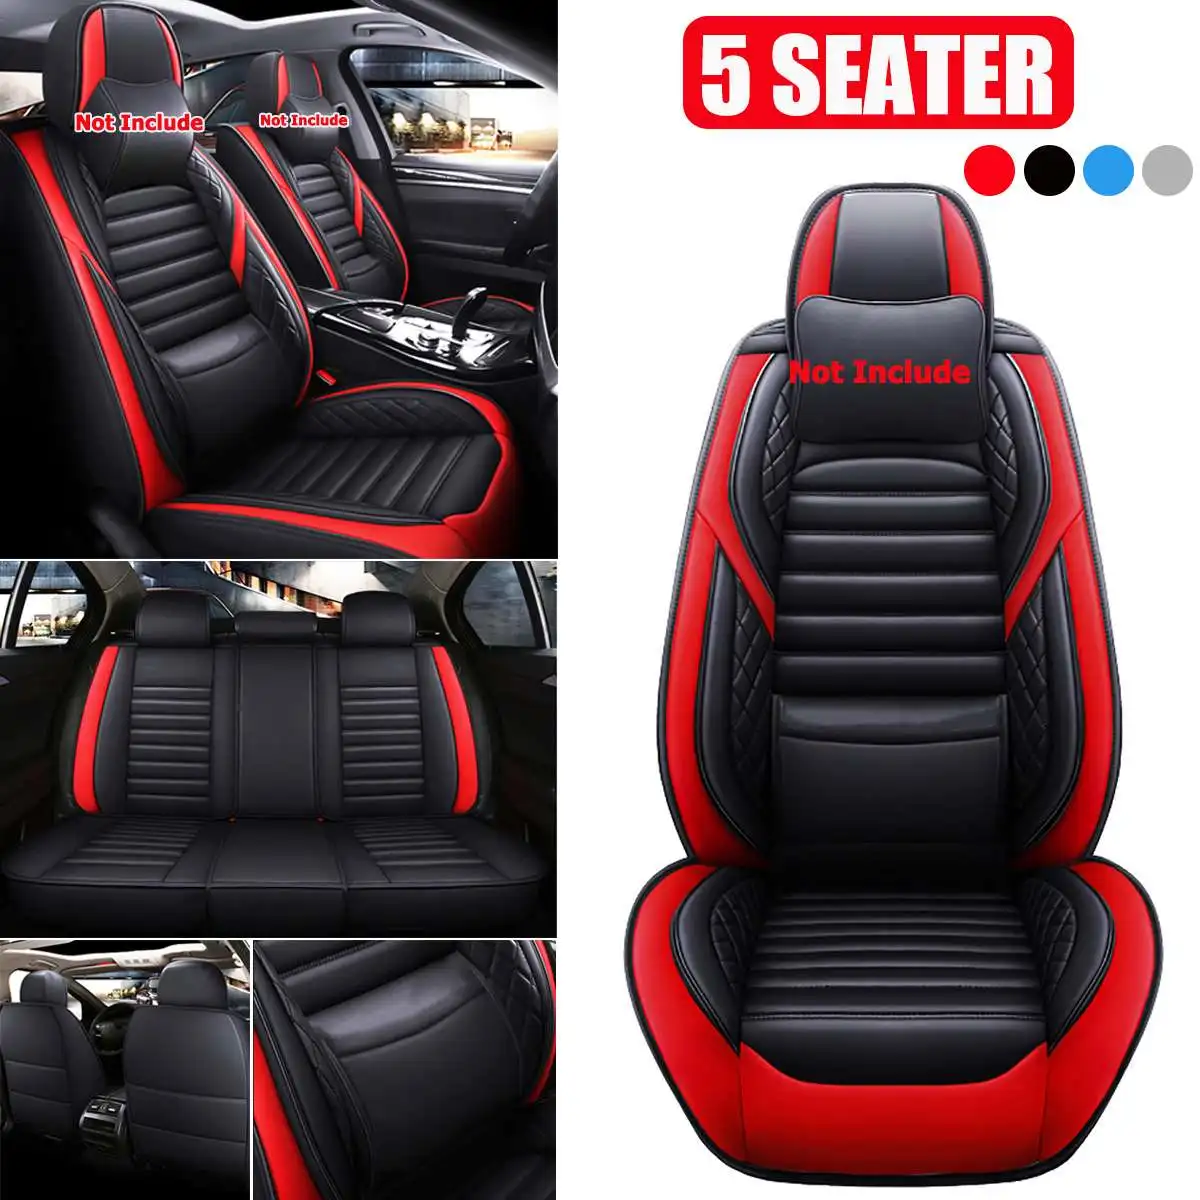 5-Seats Car Cushions Black & Red PU Leather Seat Covers Auto Front+Rear Full Set